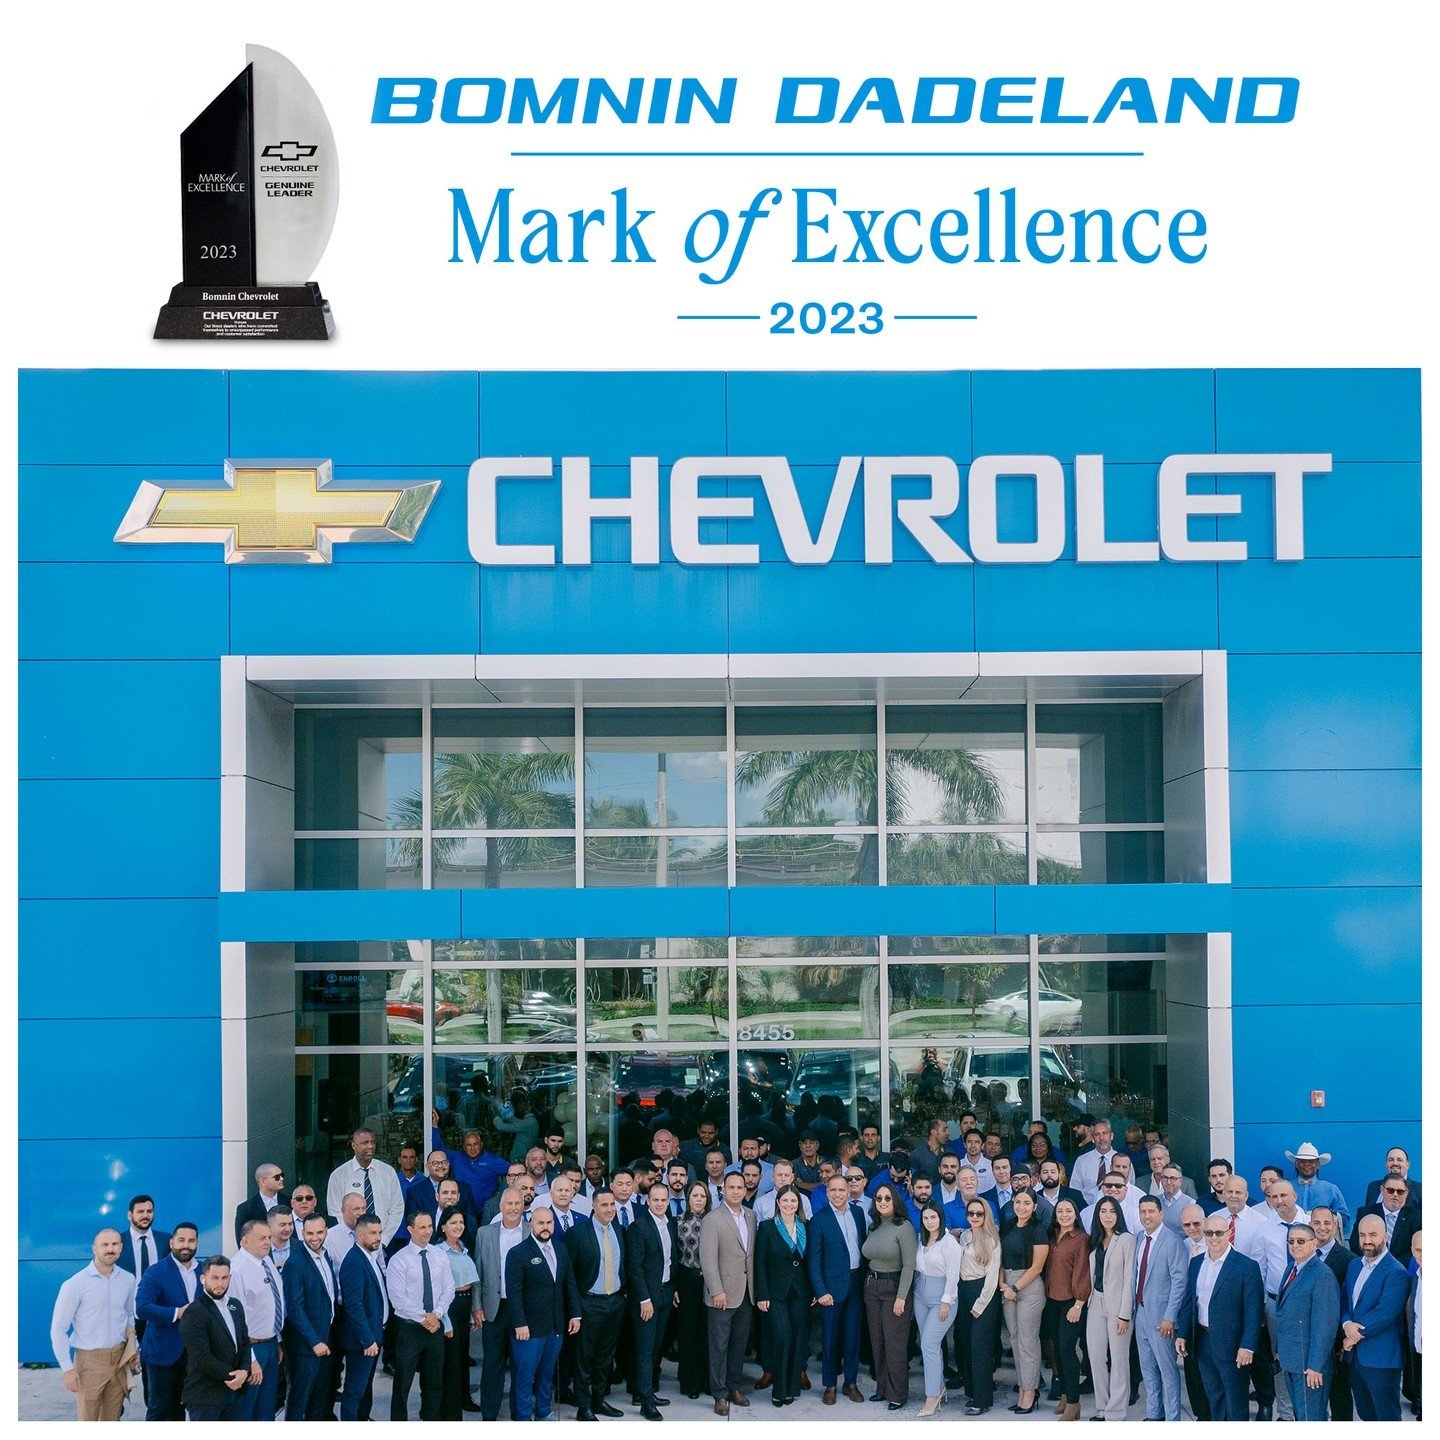 Proud moment at Bomnin Chevrolet Dadeland! 🏅🎉 We're excited to share that our store has been awarded the prestigious 2023 Mark of Excellence Award. 

This recognition is a testament to our commitment to delivering exceptional service and satisfacti